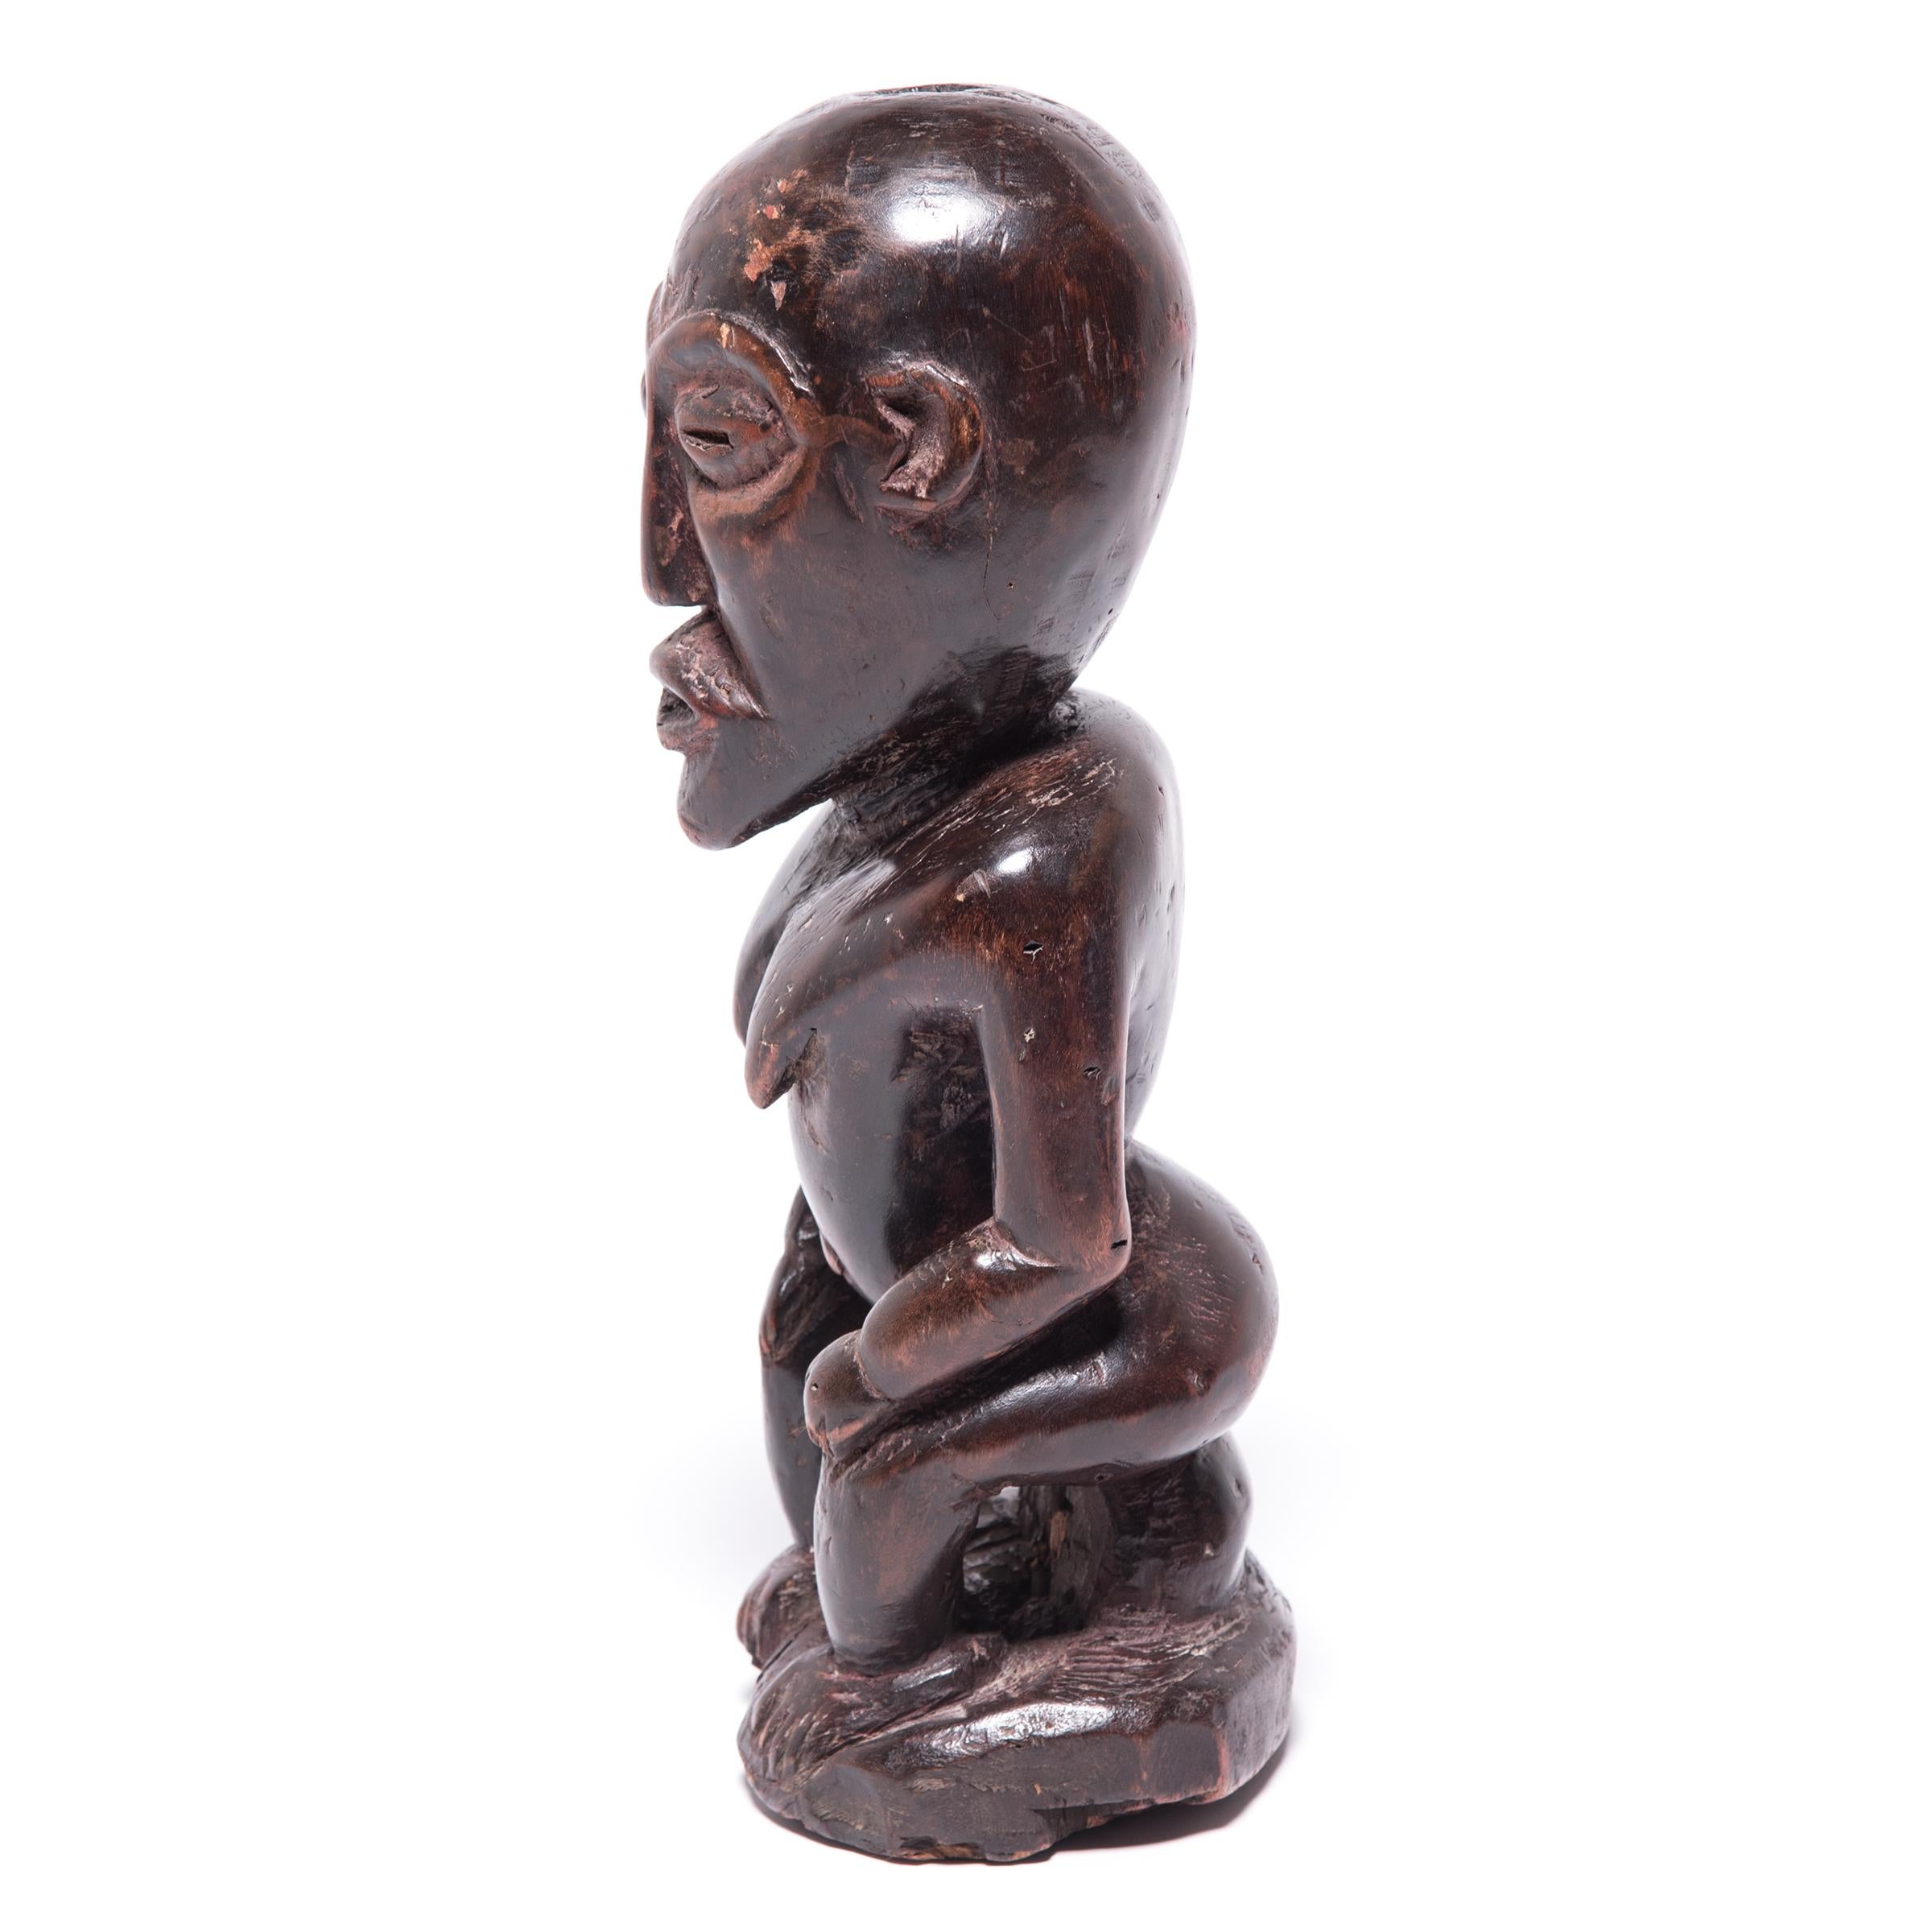 Artisans from the Luba tribe were renowned for the organic flow of their carving style. This example clearly shows the smooth transition from aspect to aspect, maintaining a singular sheen and surface. The slight tilt of the head combines with the